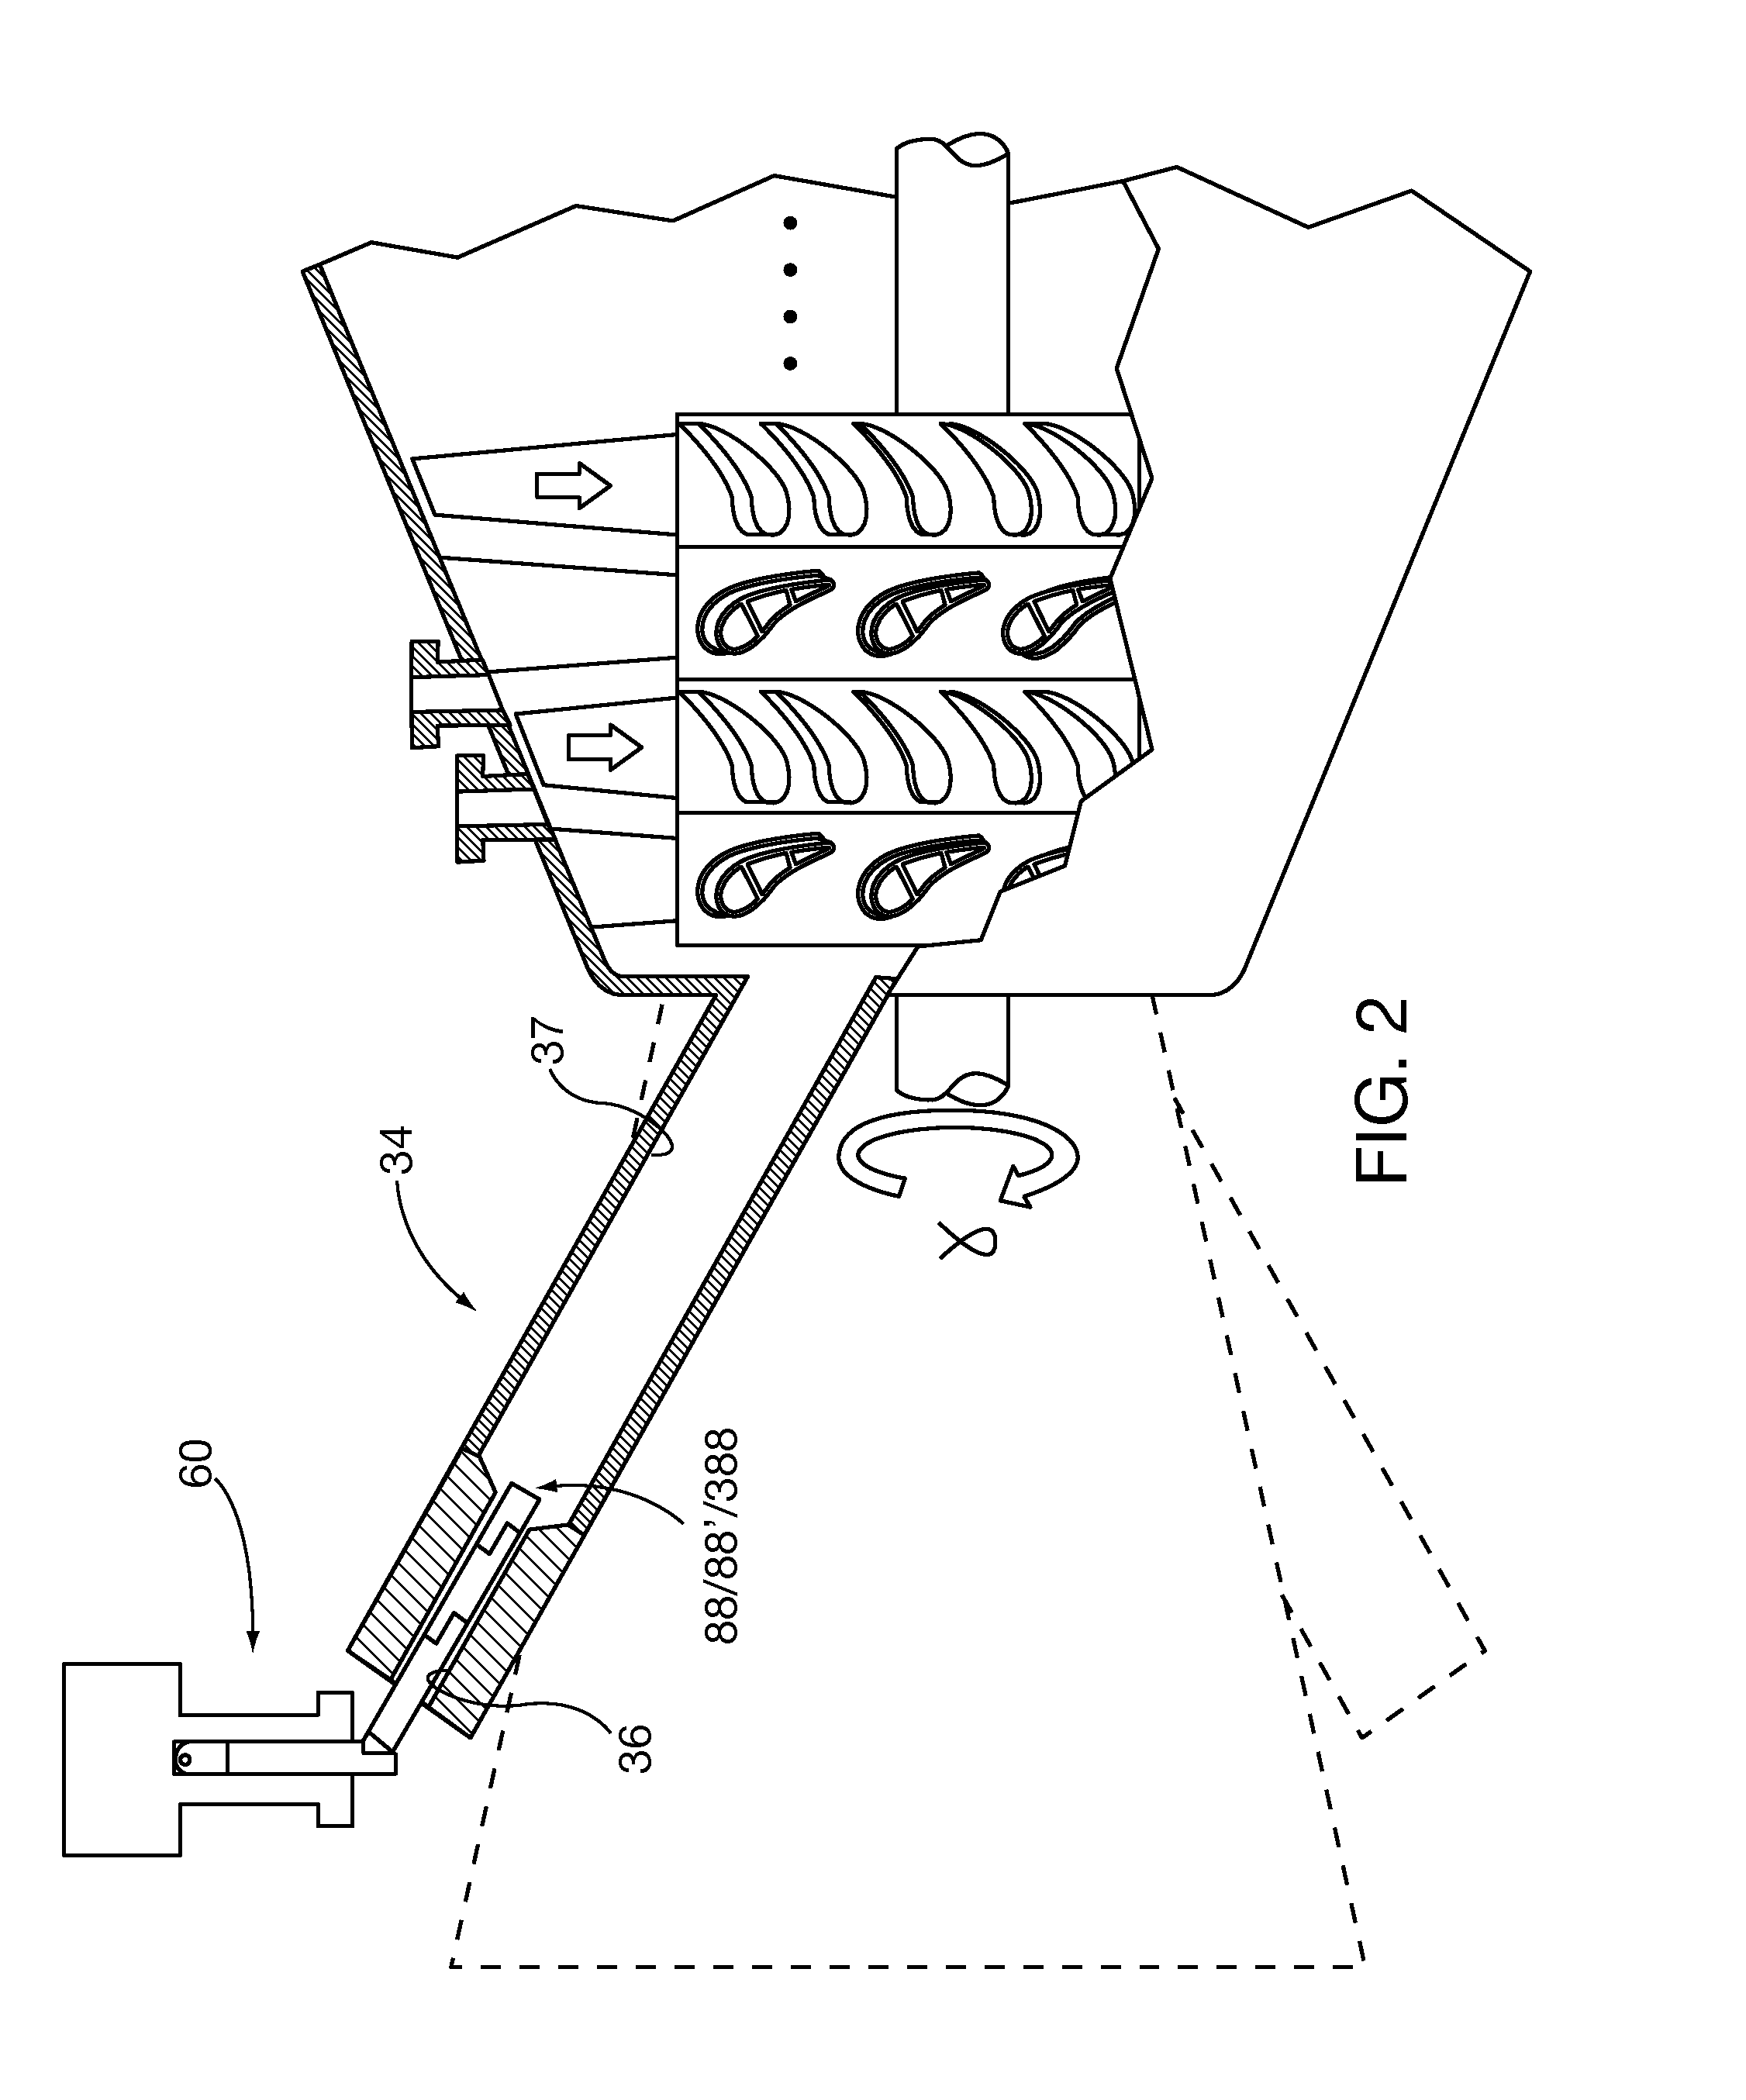 Method and system for surface profile inspection of off-line industrial gas turbines and other power generation machinery